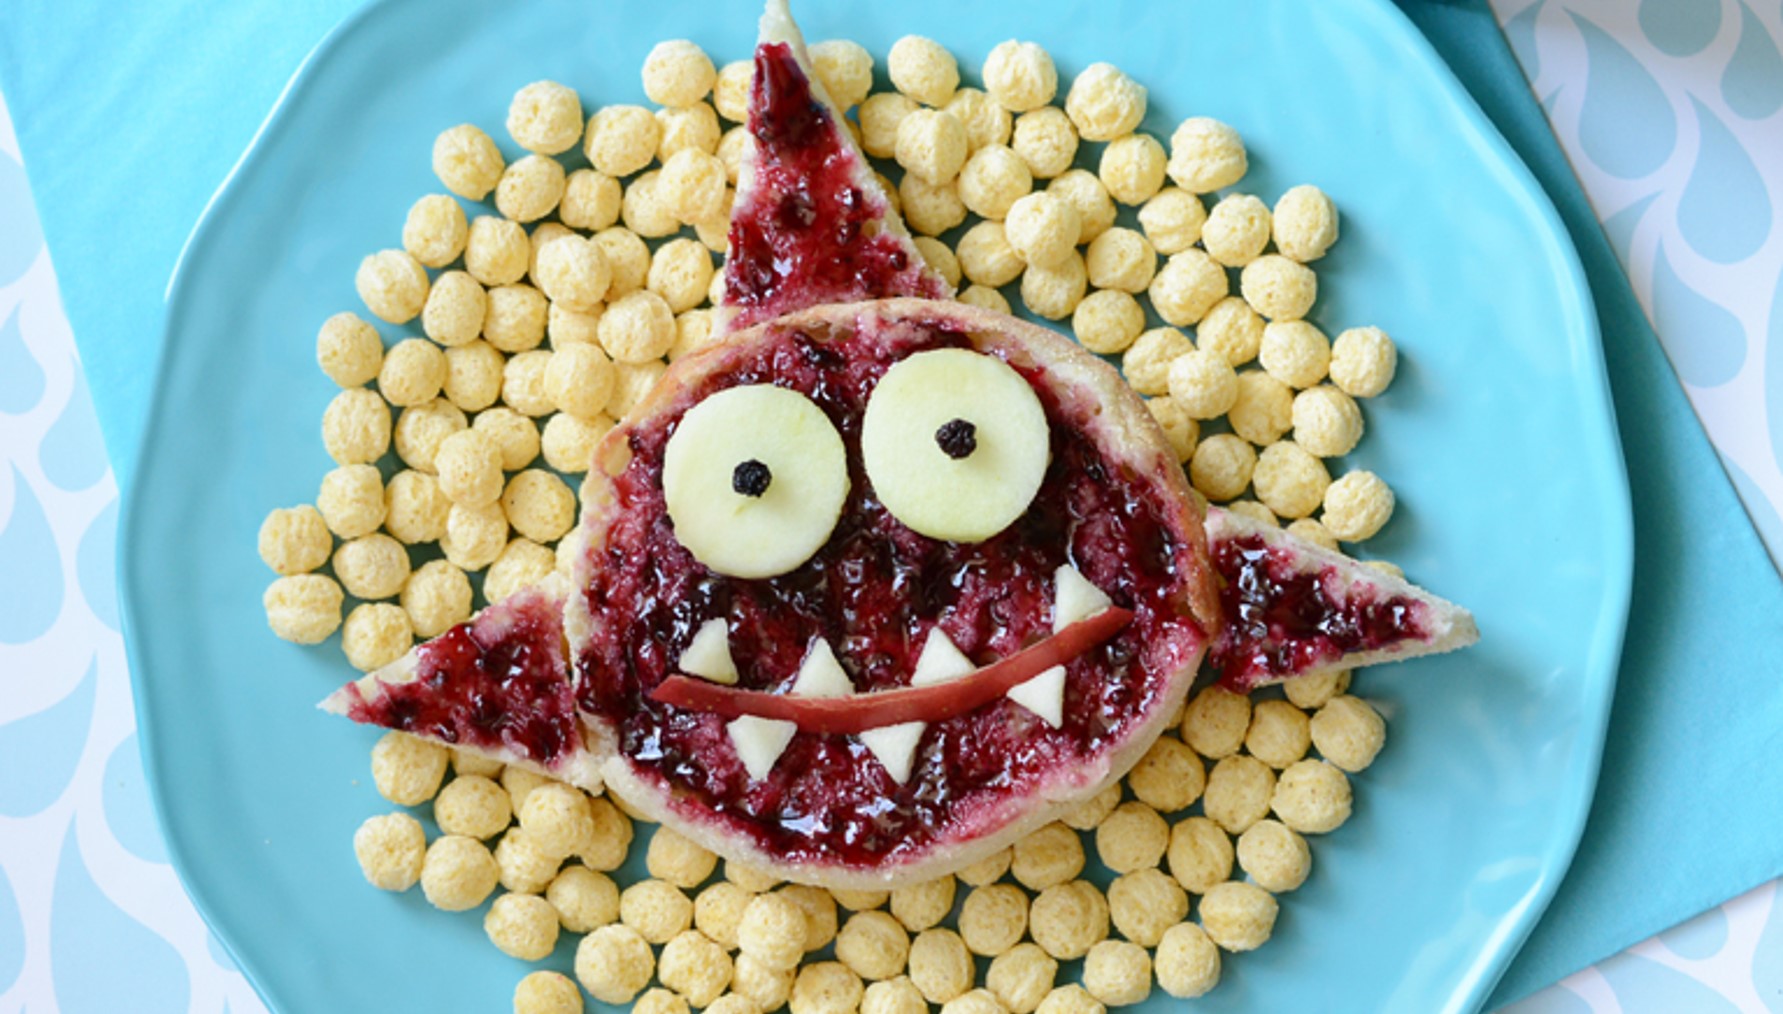 Kix cereal pieces on a blue plate with a jelly toast  shaped like a friendly shark on top of them